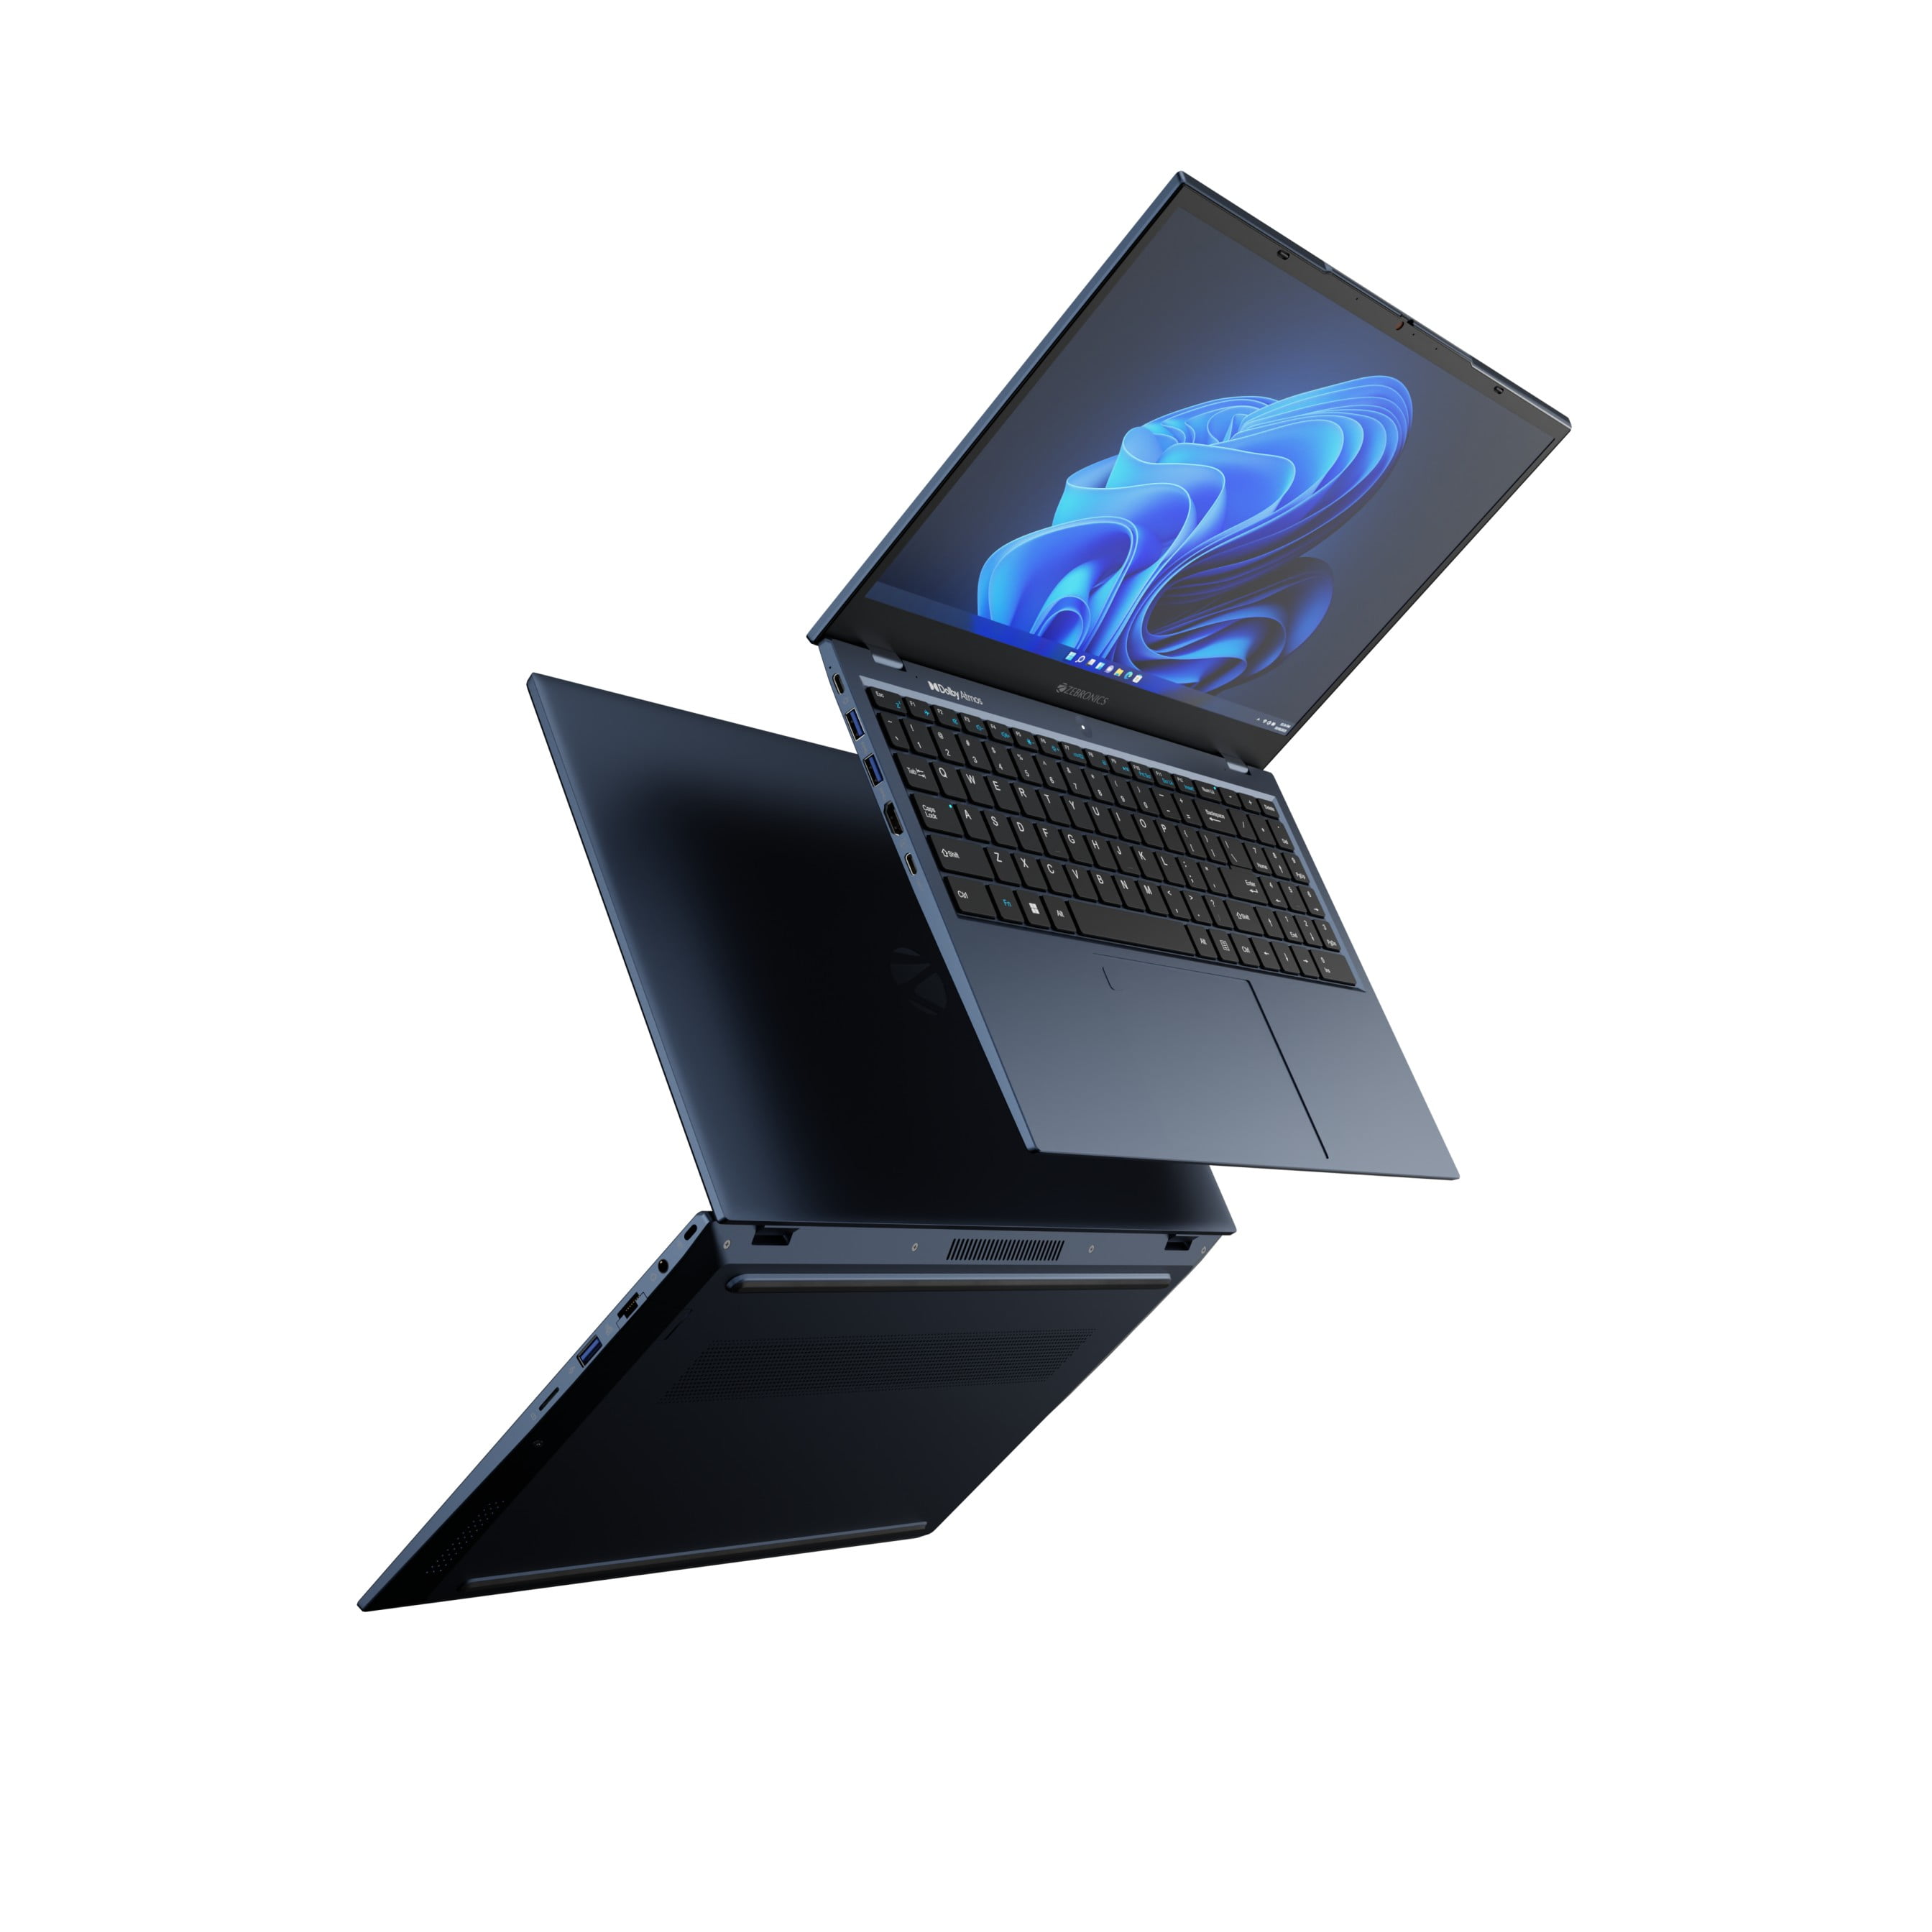 Zebronics Launches New Laptop Series with Dolby Atmos